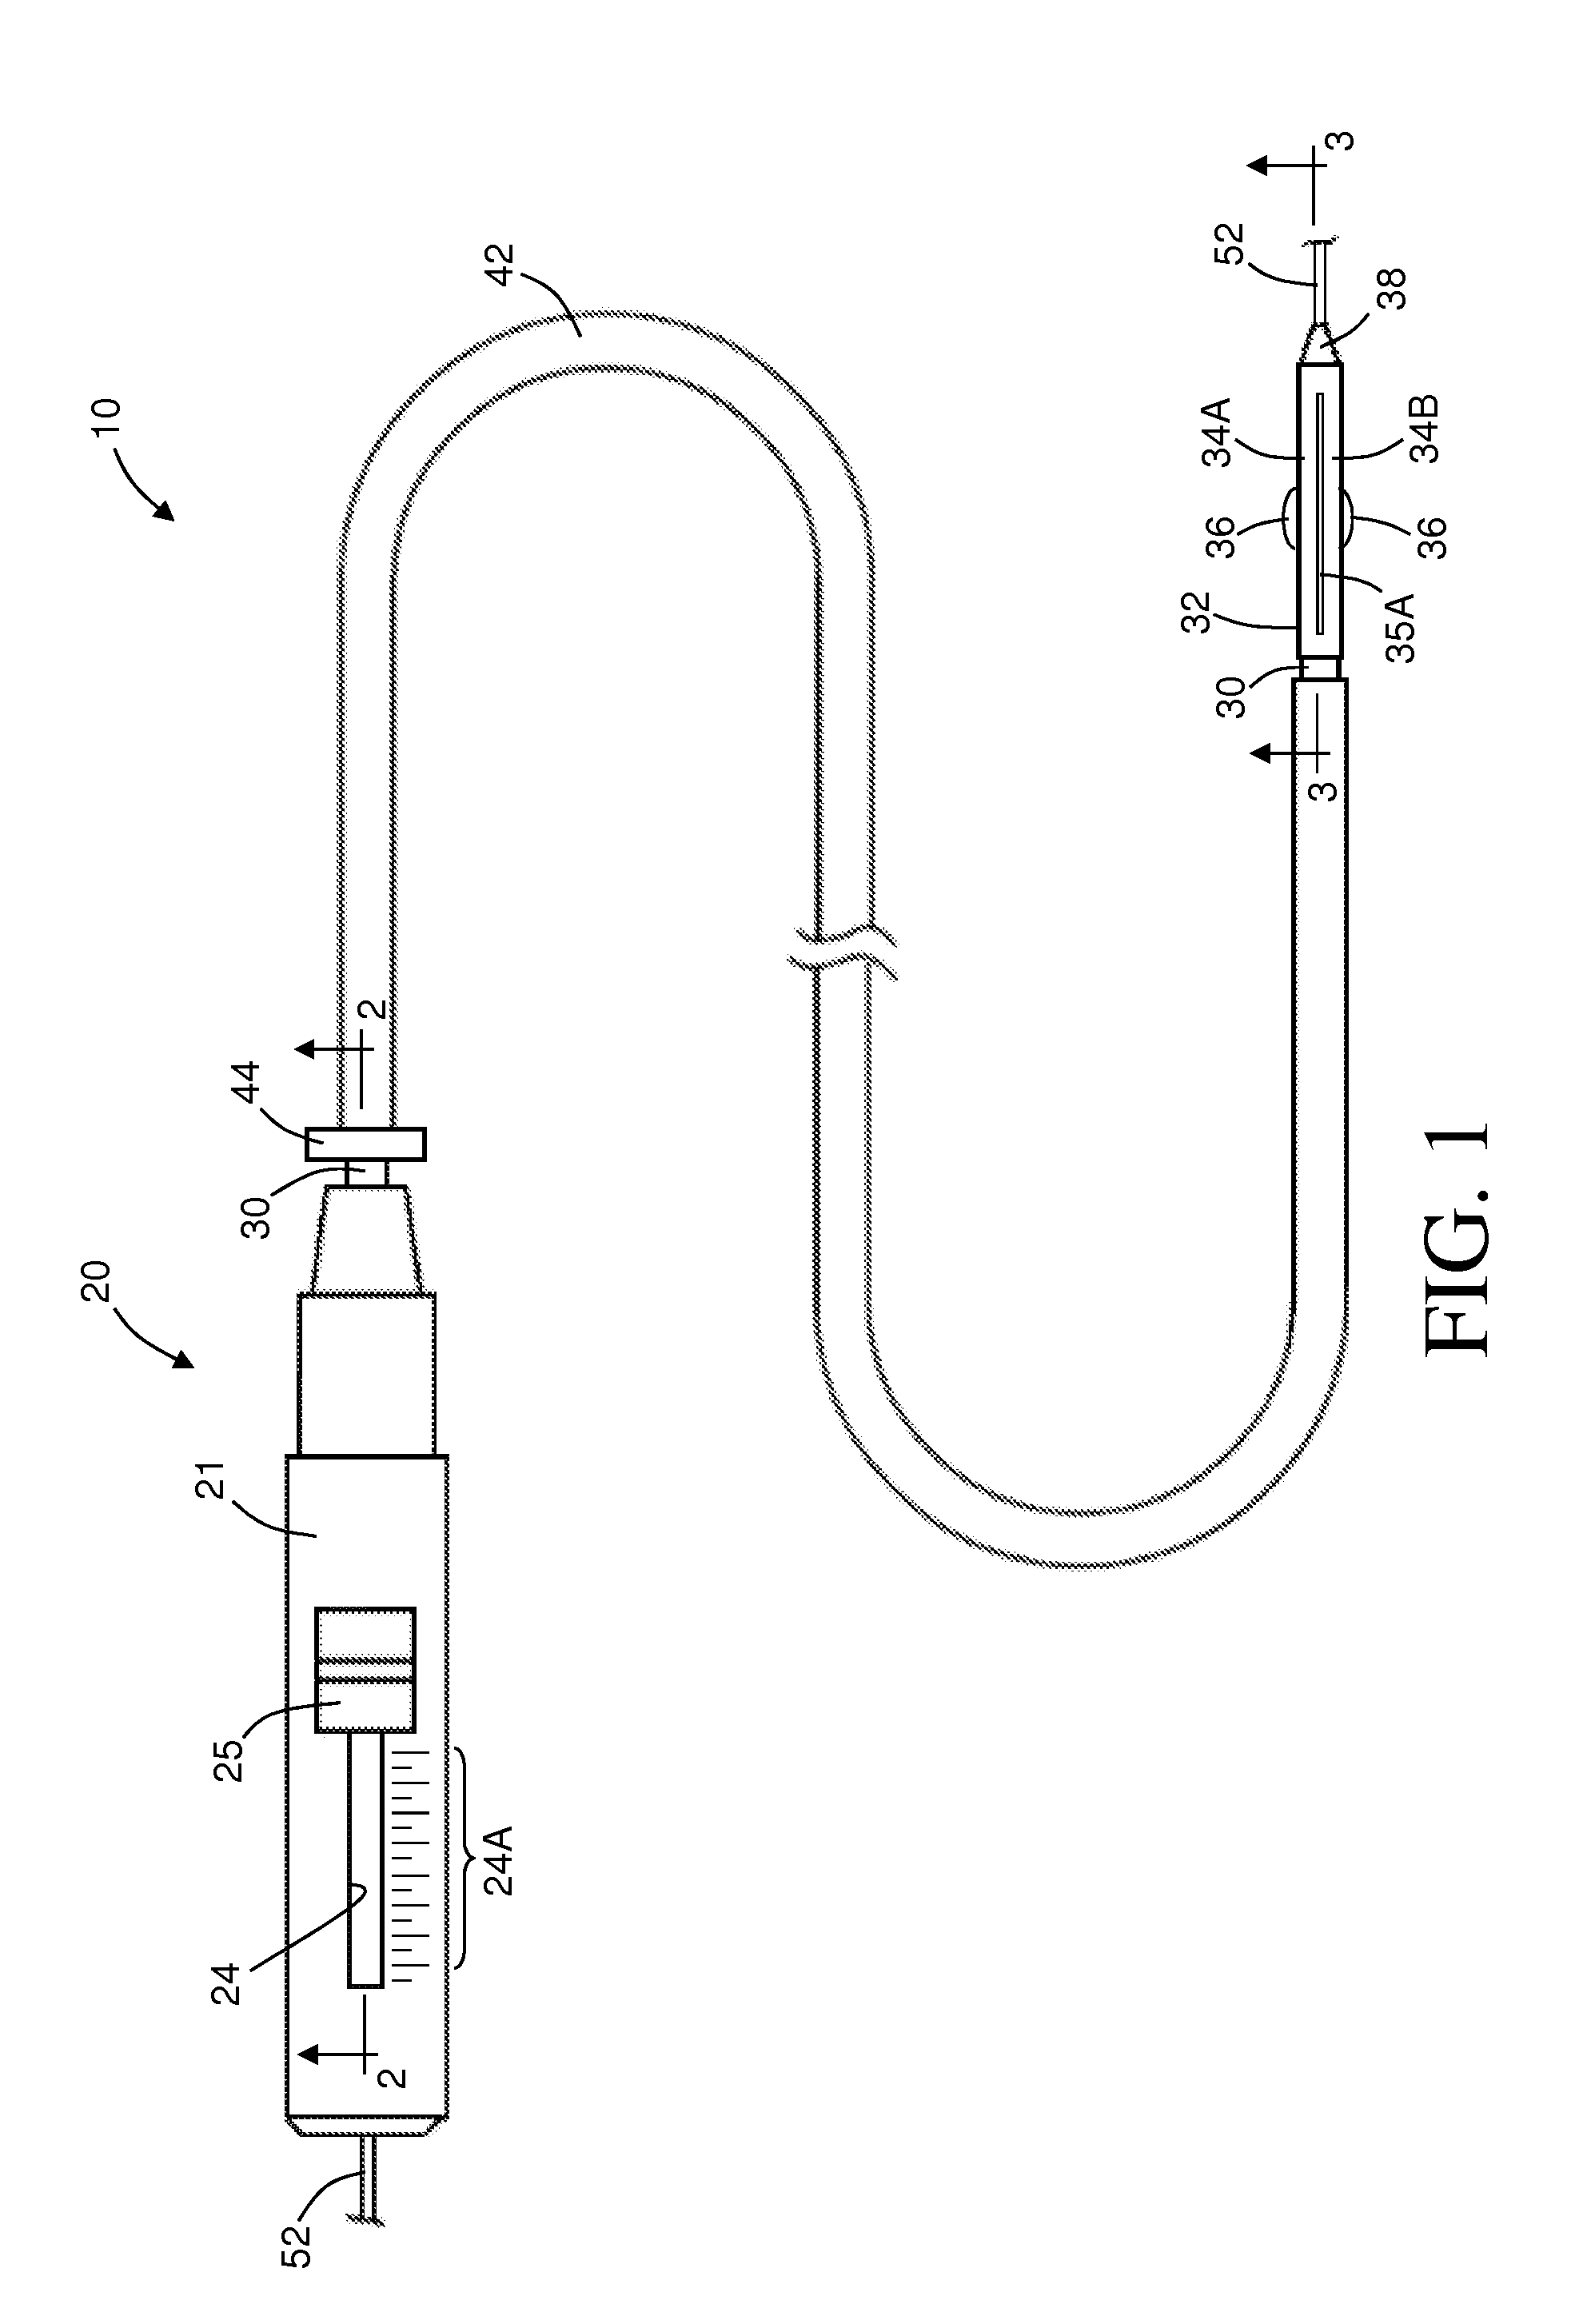 Intravascular Catheter Having An Expandable Incising Portion